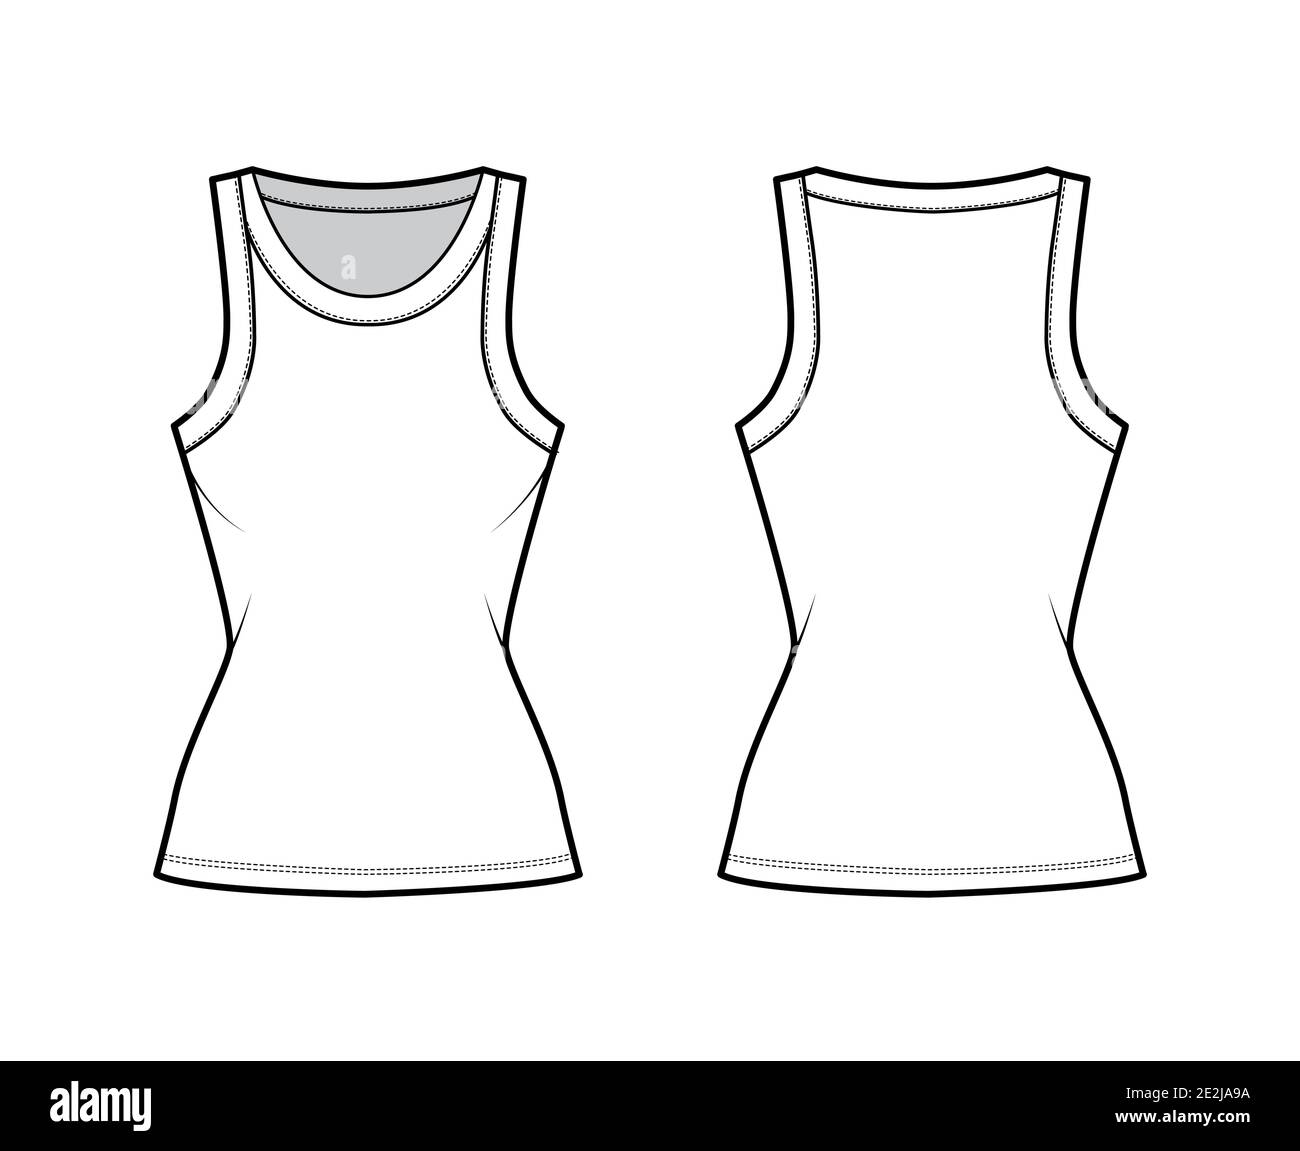 Cotton-jersey tank technical fashion illustration with fitted body, wide  scoop neckline, sleeveless. Flat outwear cami apparel template front, back  white color. Women men unisex shirt top CAD mockup Stock Vector Image 